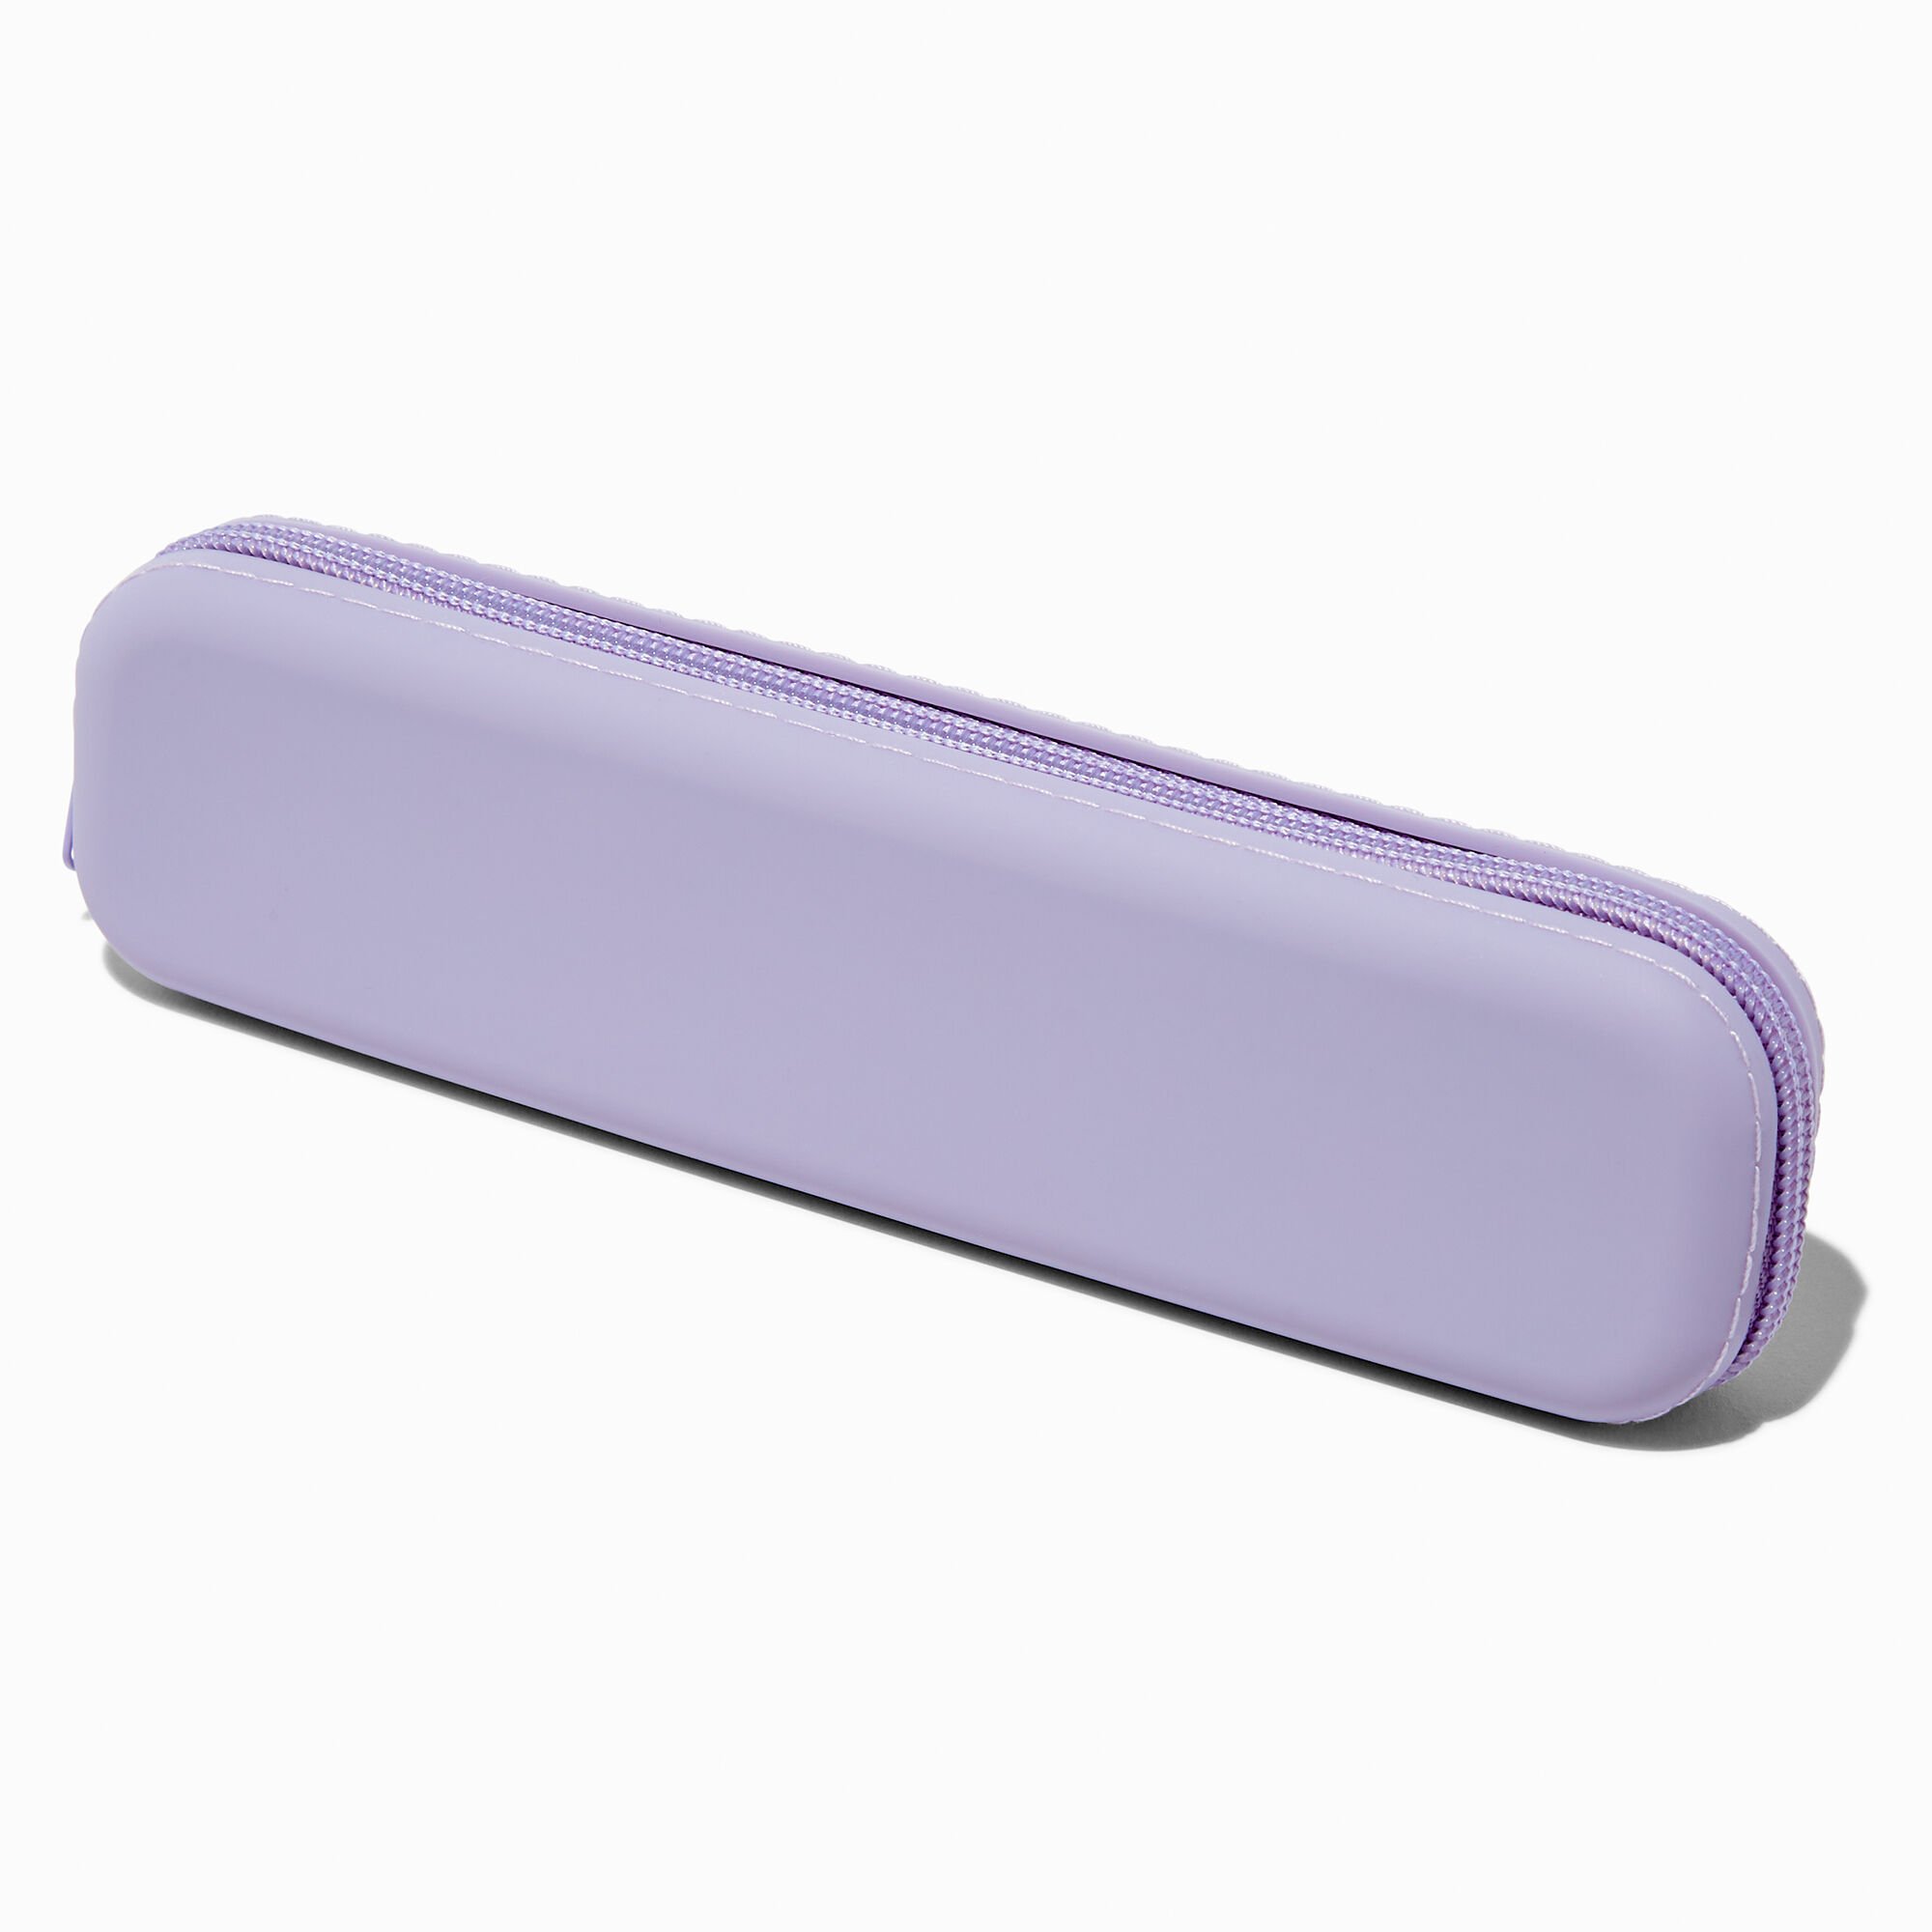 View Claires Silicone Makeup Brush Bag Purple information